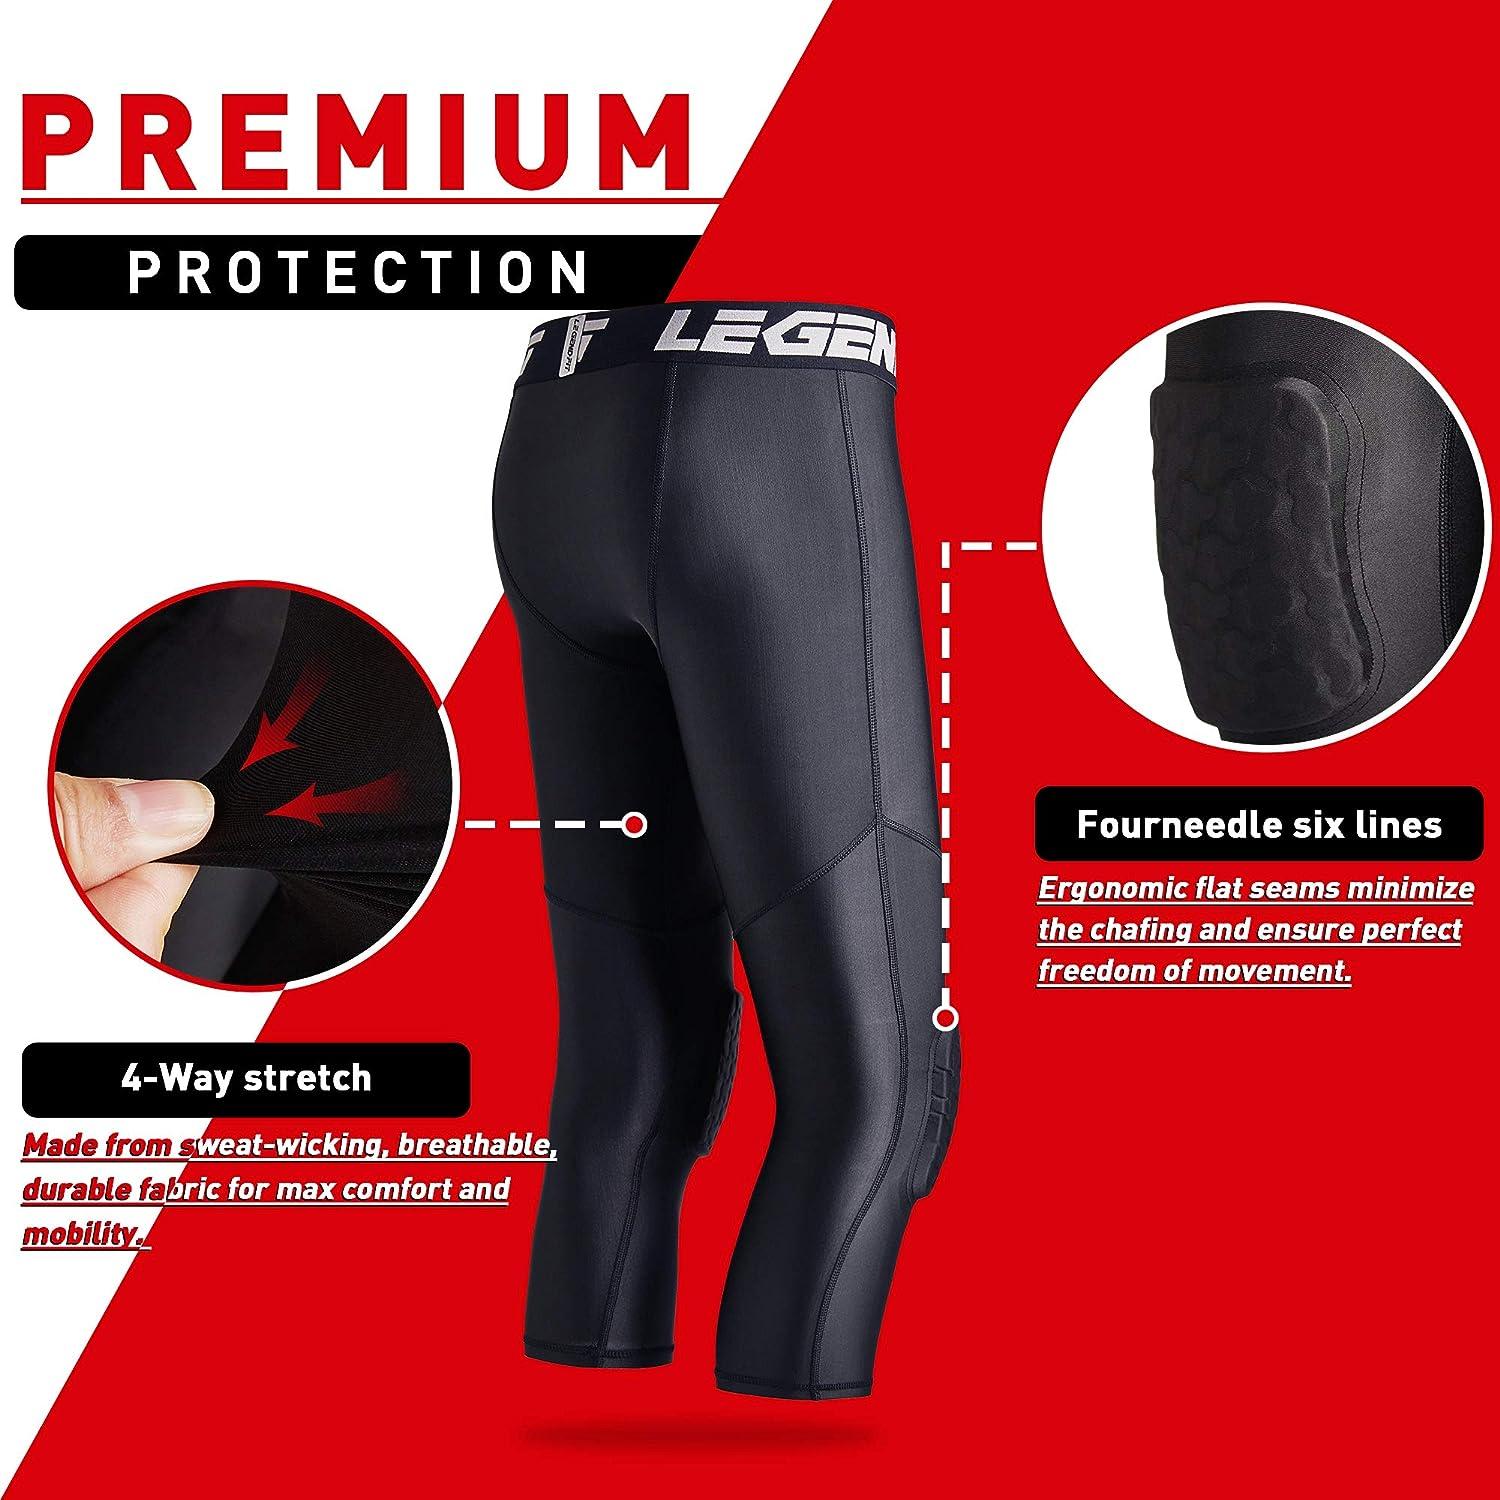 Legendfit Youth Boys Basketball Compression Pants with Knee Pads 3/4 Capri  Padded Sport Tights Athletic Workout Leggings Black Small